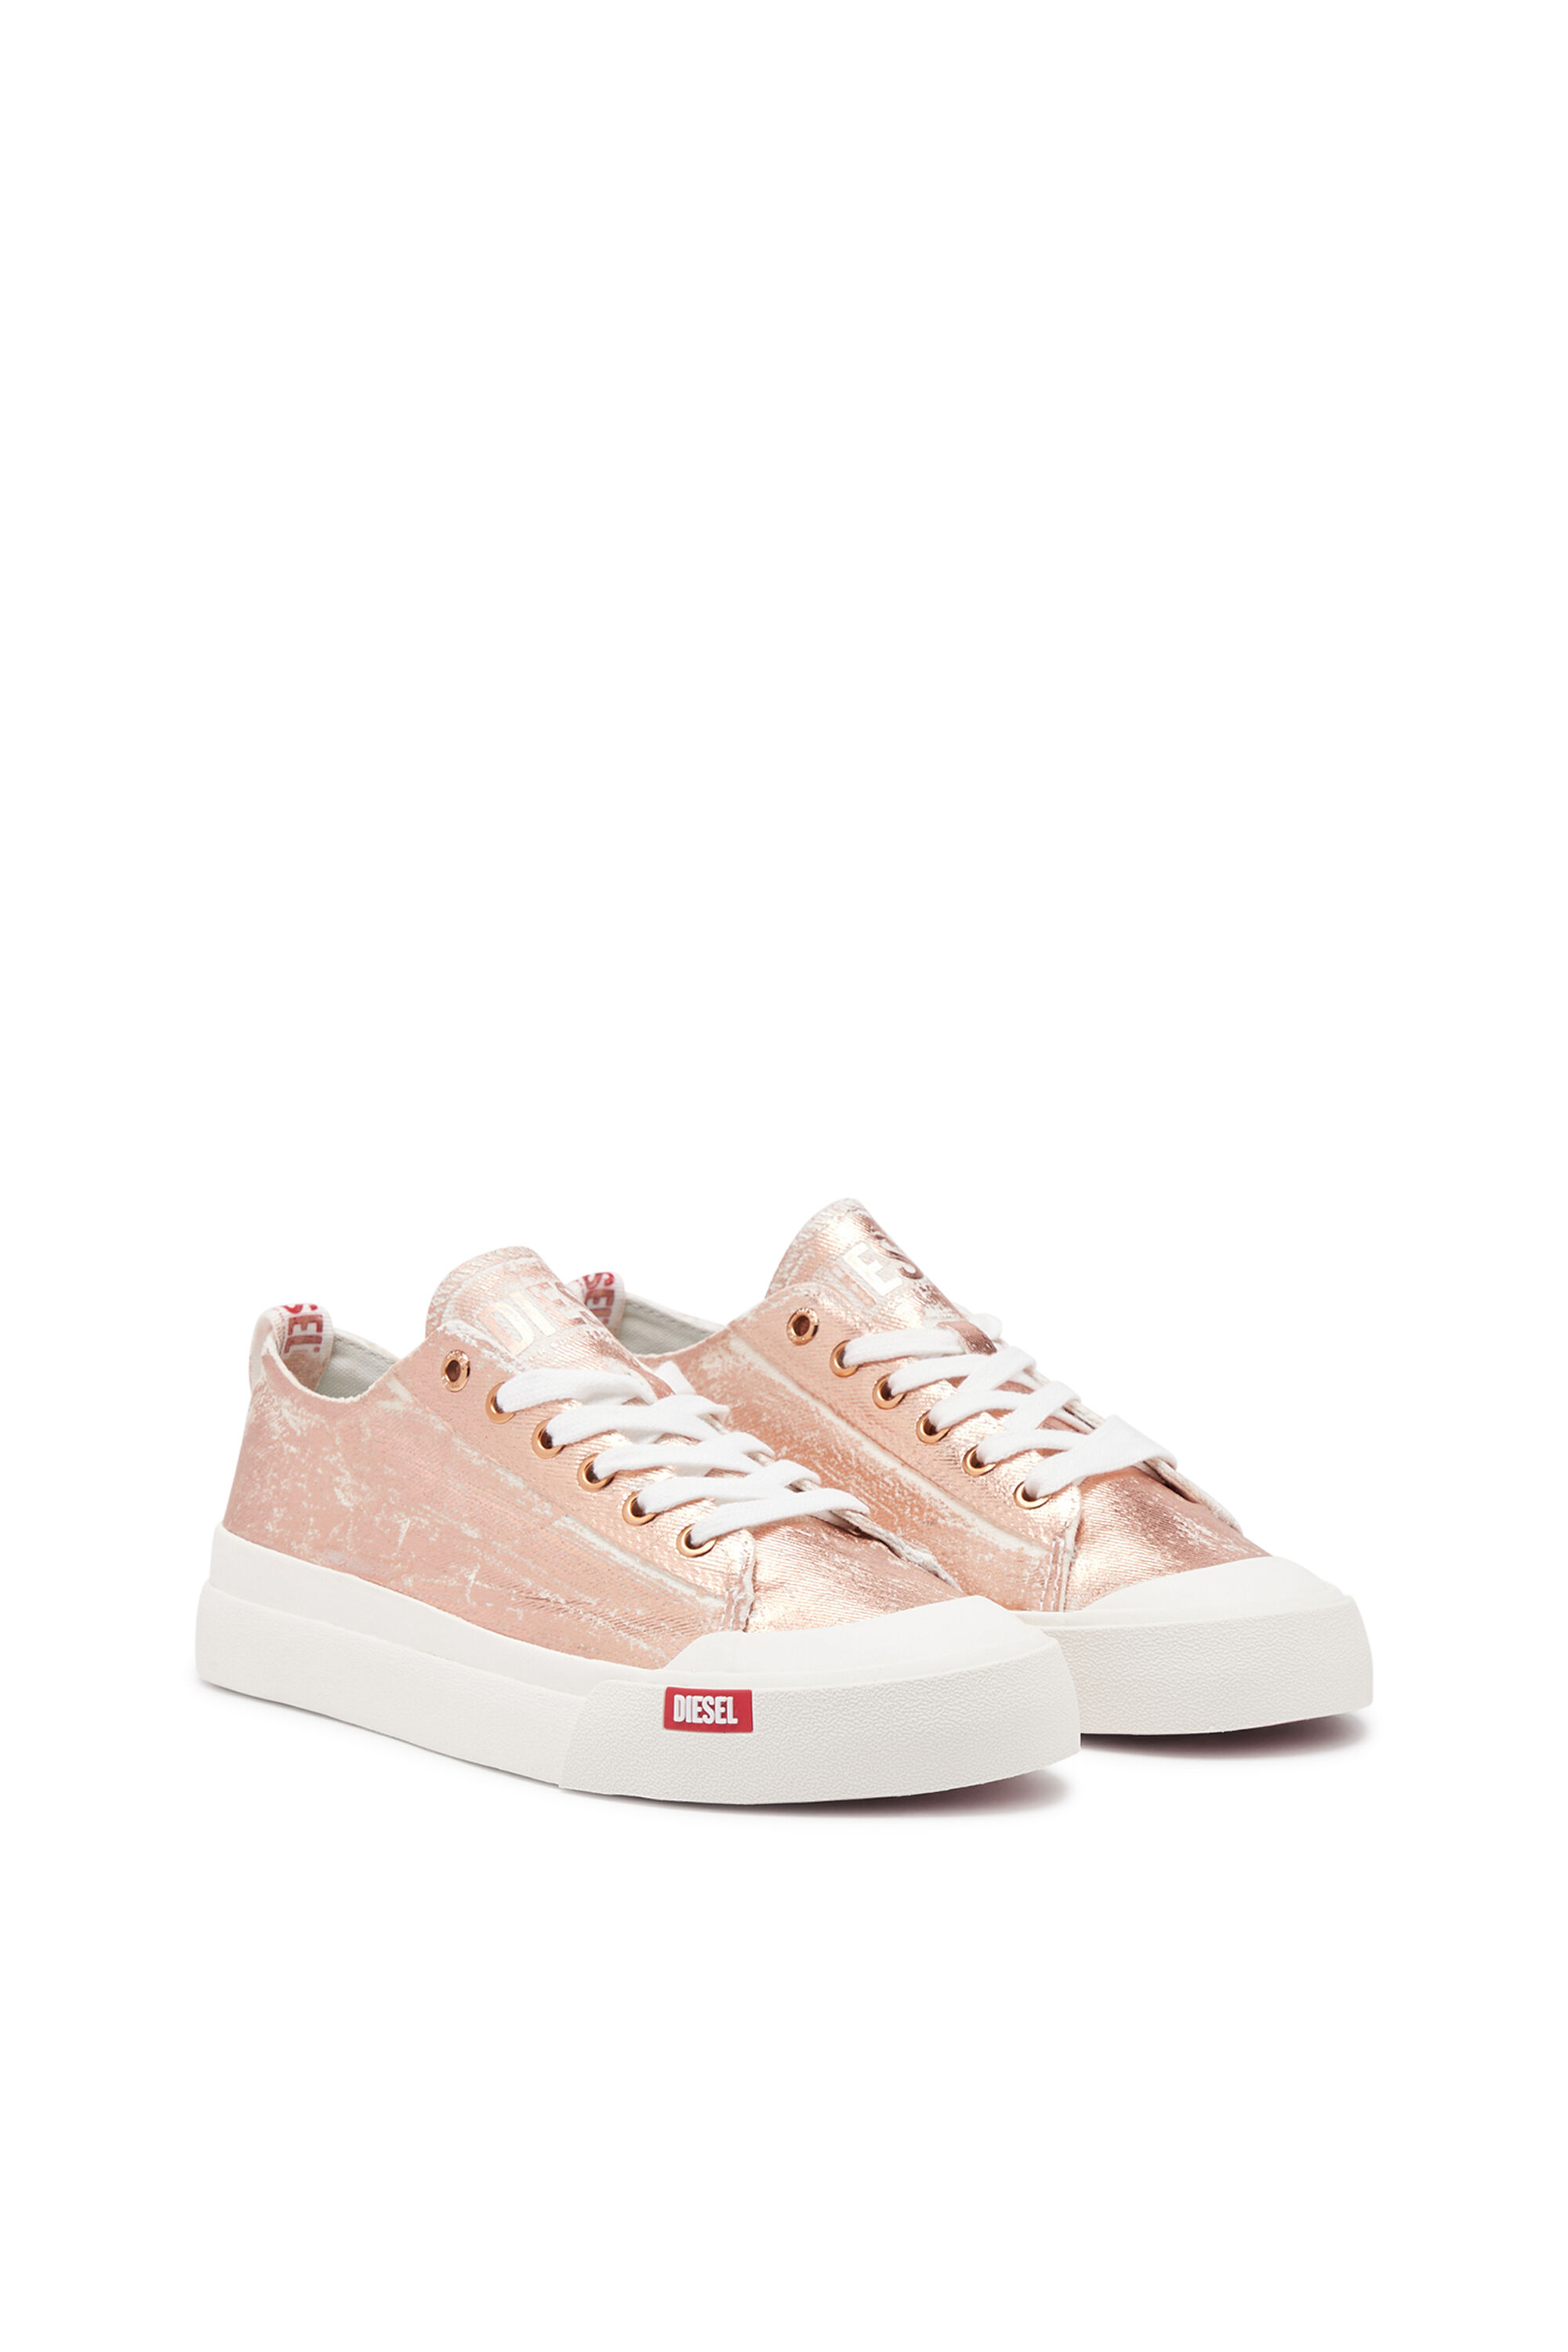 Diesel - S-ATHOS LOW W, Donna S-Athos Low-Sneaker in canvas metallizzato distressed in Rosa - Image 2